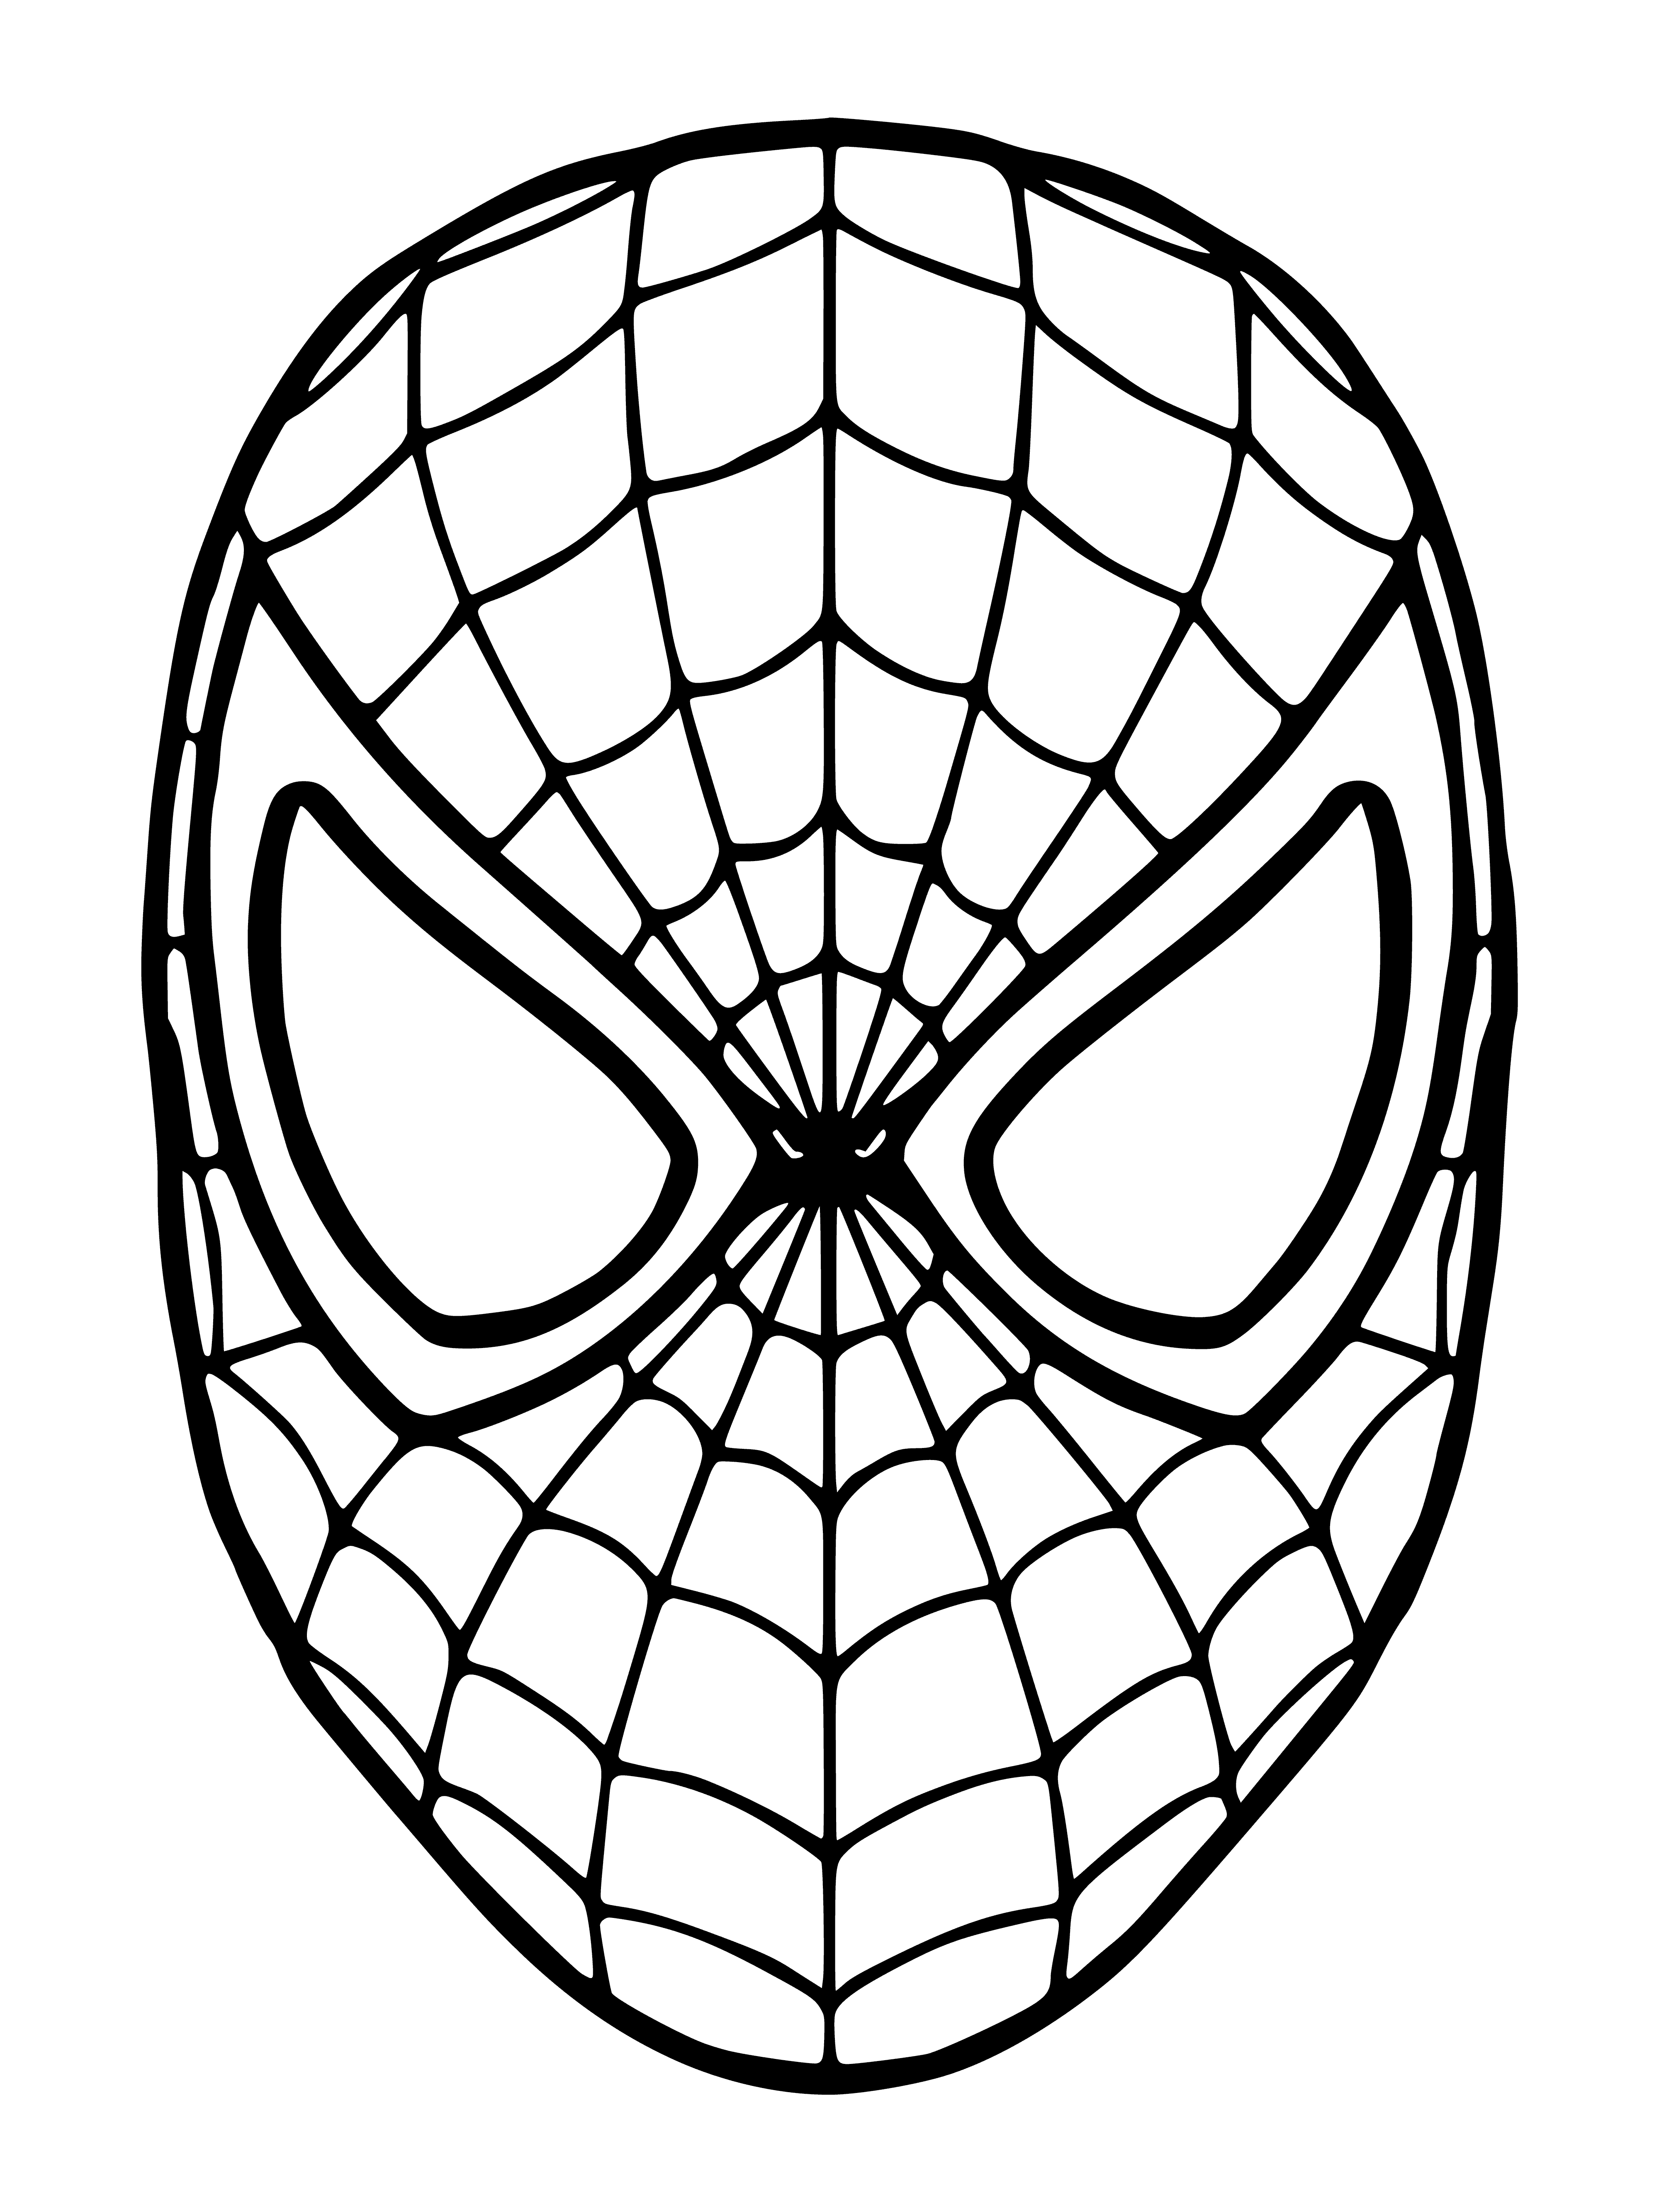 coloring page: Spiderman mask featured: bright red with black spider in center, big black eyes, open mouth scream, surrounded by black spiderweb.